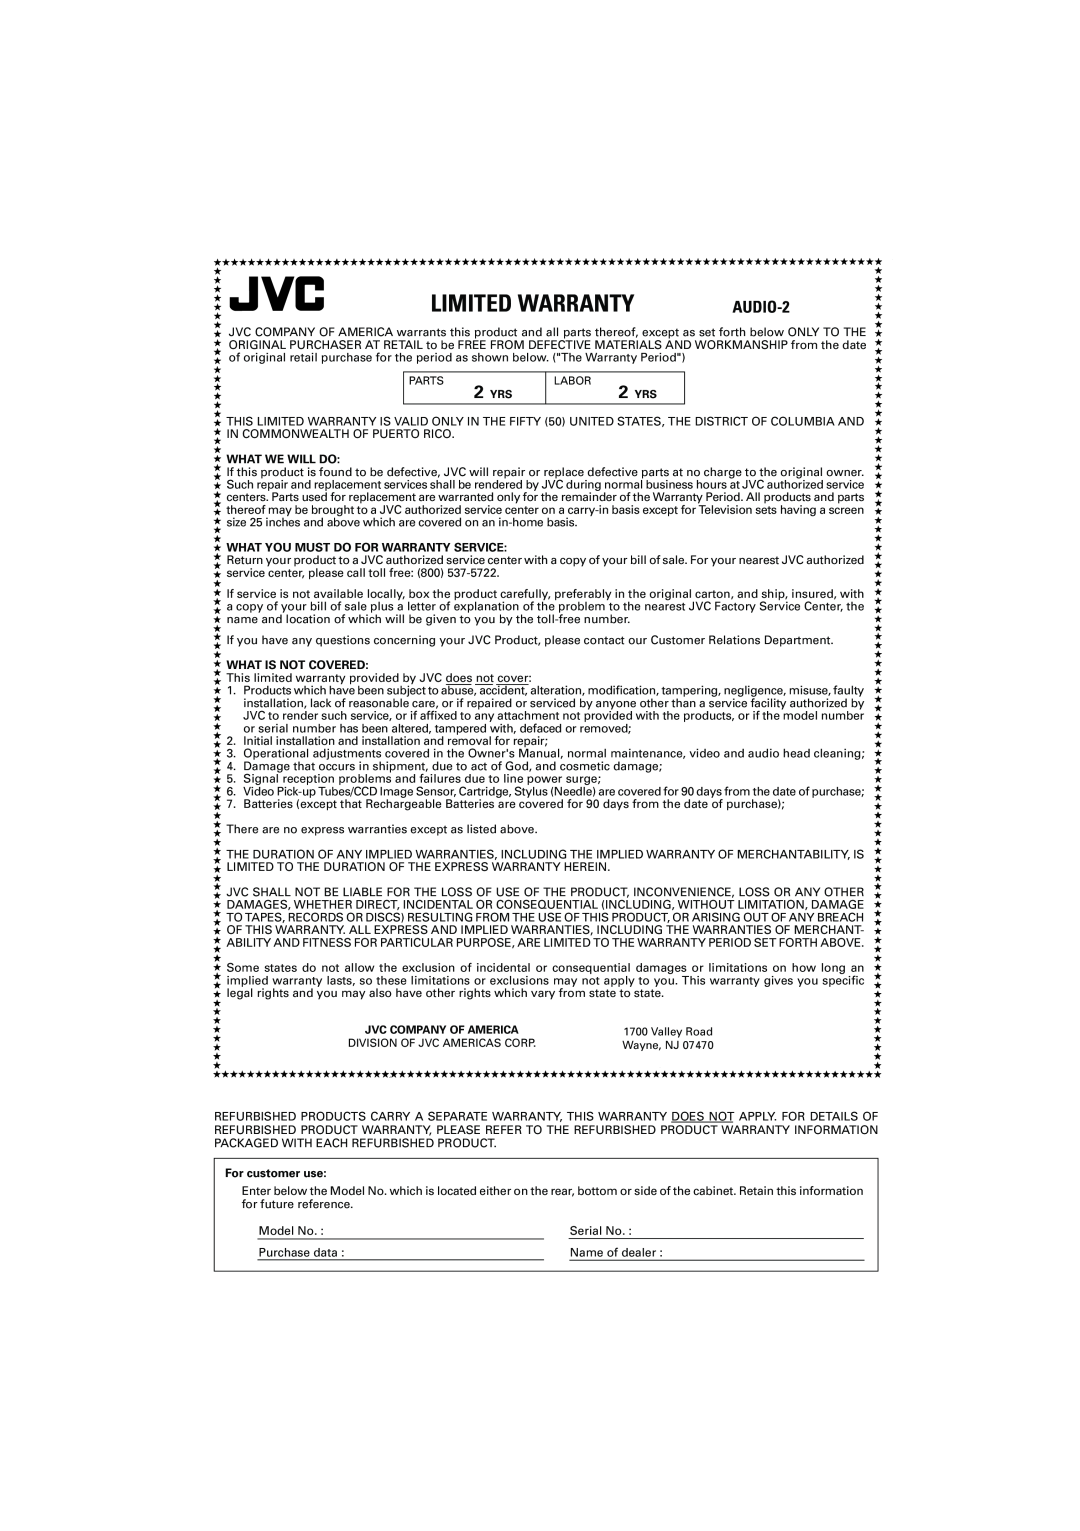 JVC RX-ES1SL manual Limited Warranty, AUDIO-2, What We Will Do, What You Must Do For Warranty Service, What Is Not Covered 